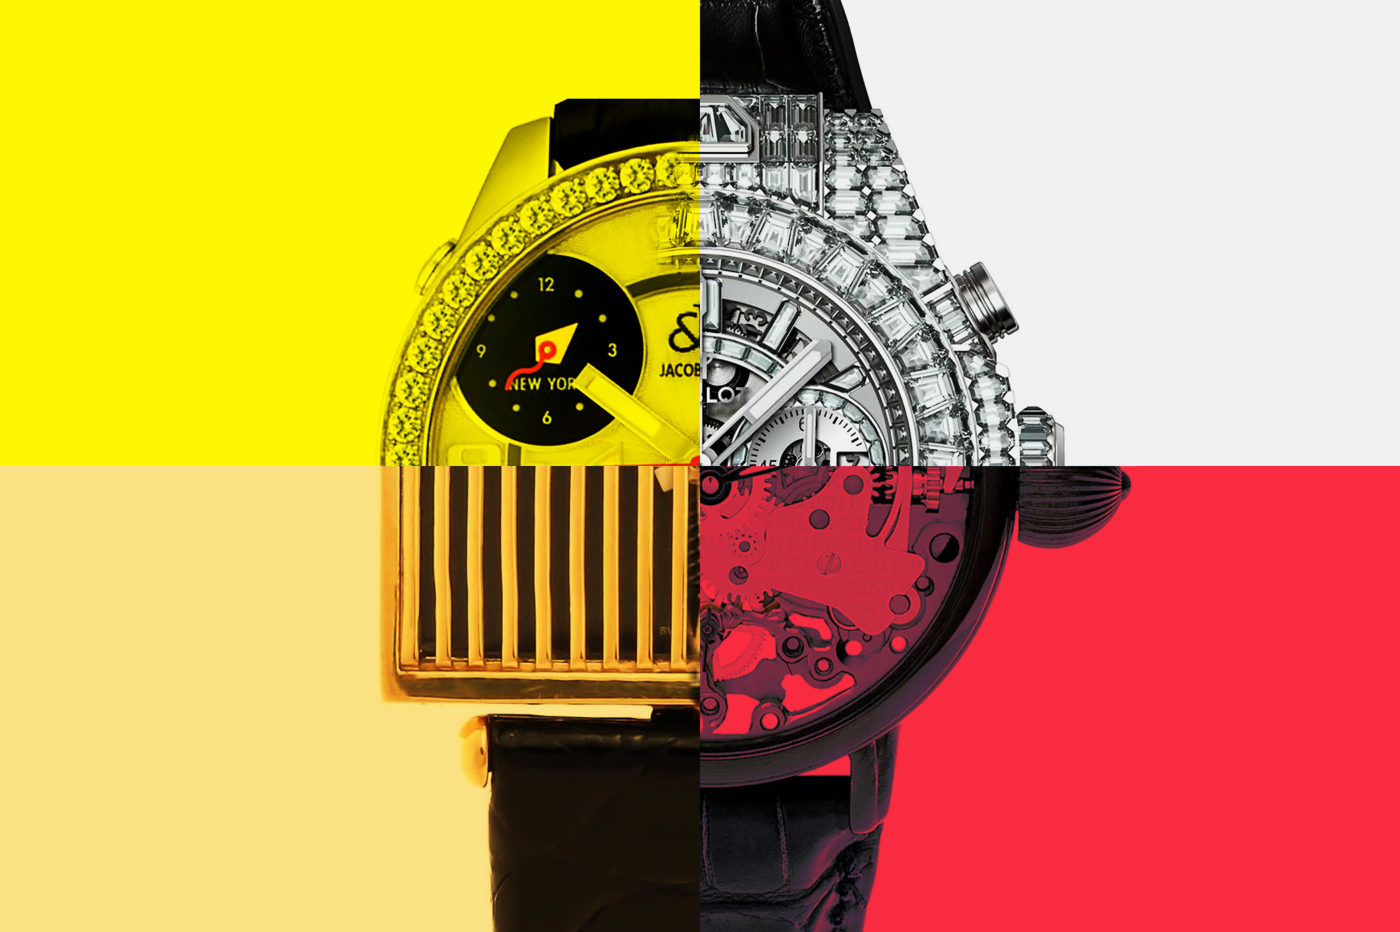 Timebloid 5 watches with the most questionable design